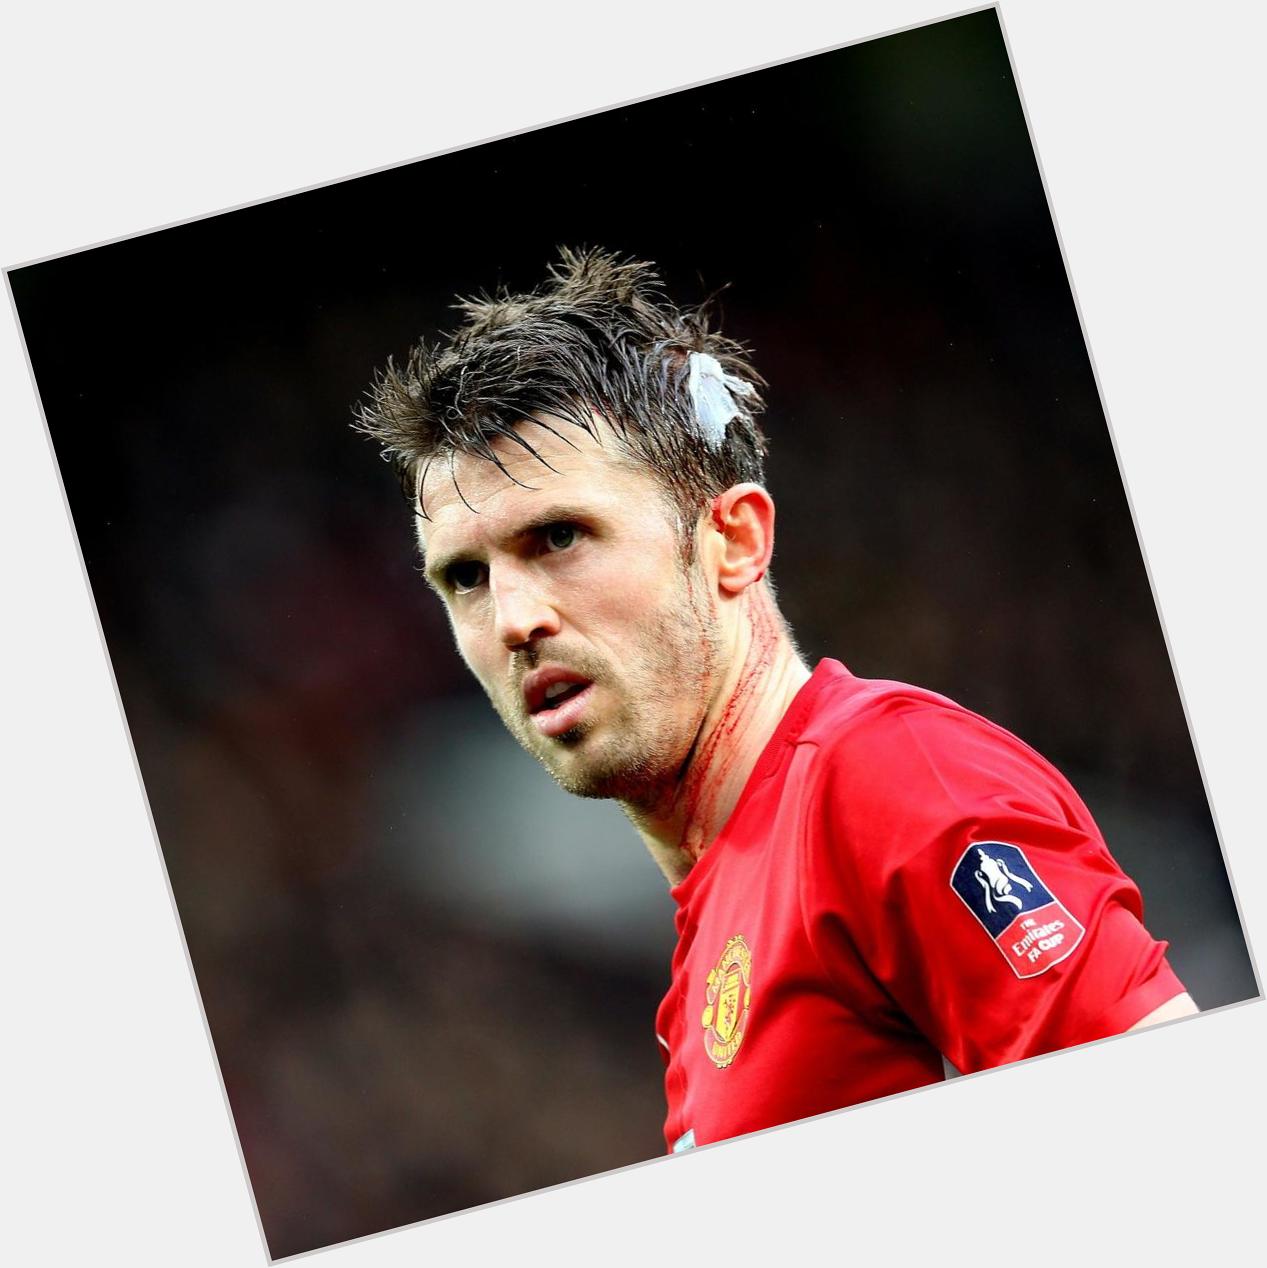 Happy 36th birthday to the unsung hero Manchester United, Michael Carrick. 